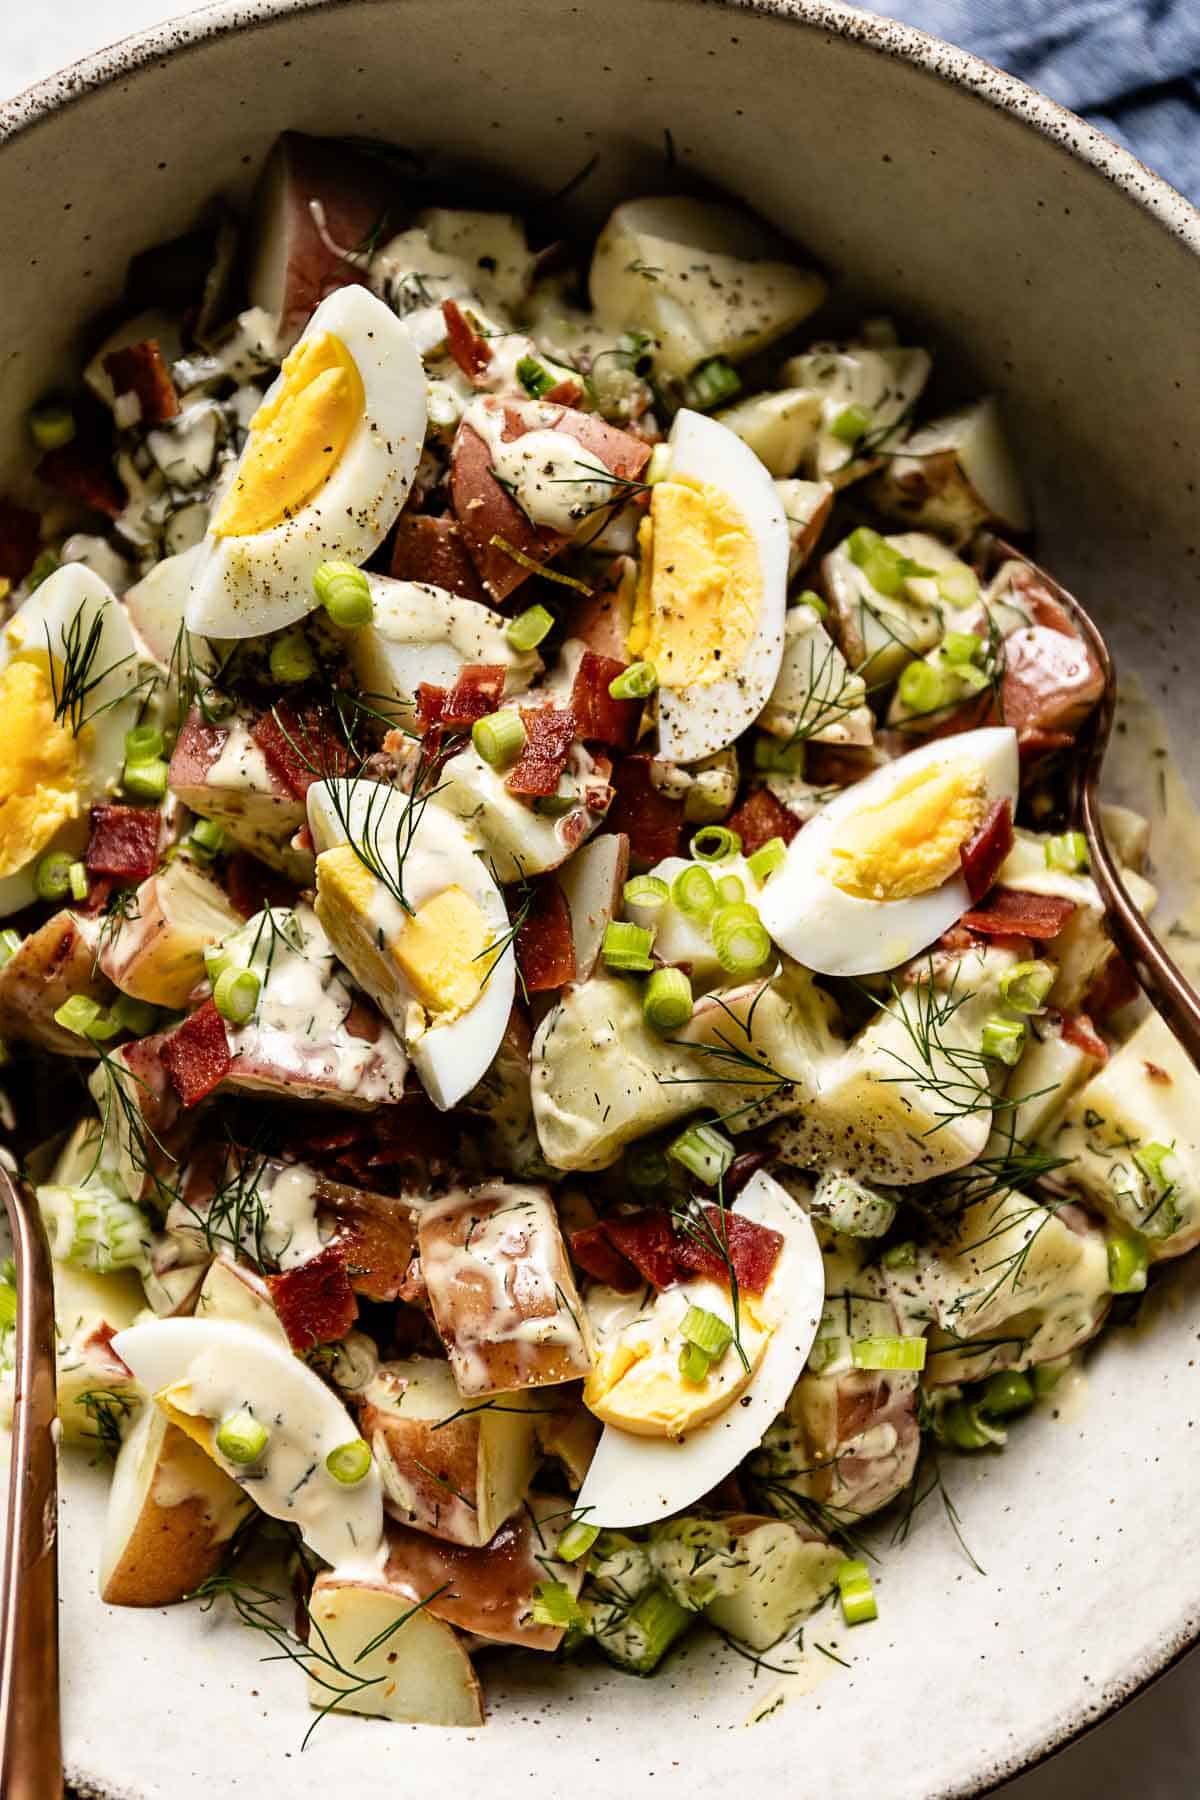 Red potato salad with bacon and eggs in a bowl from the top view.